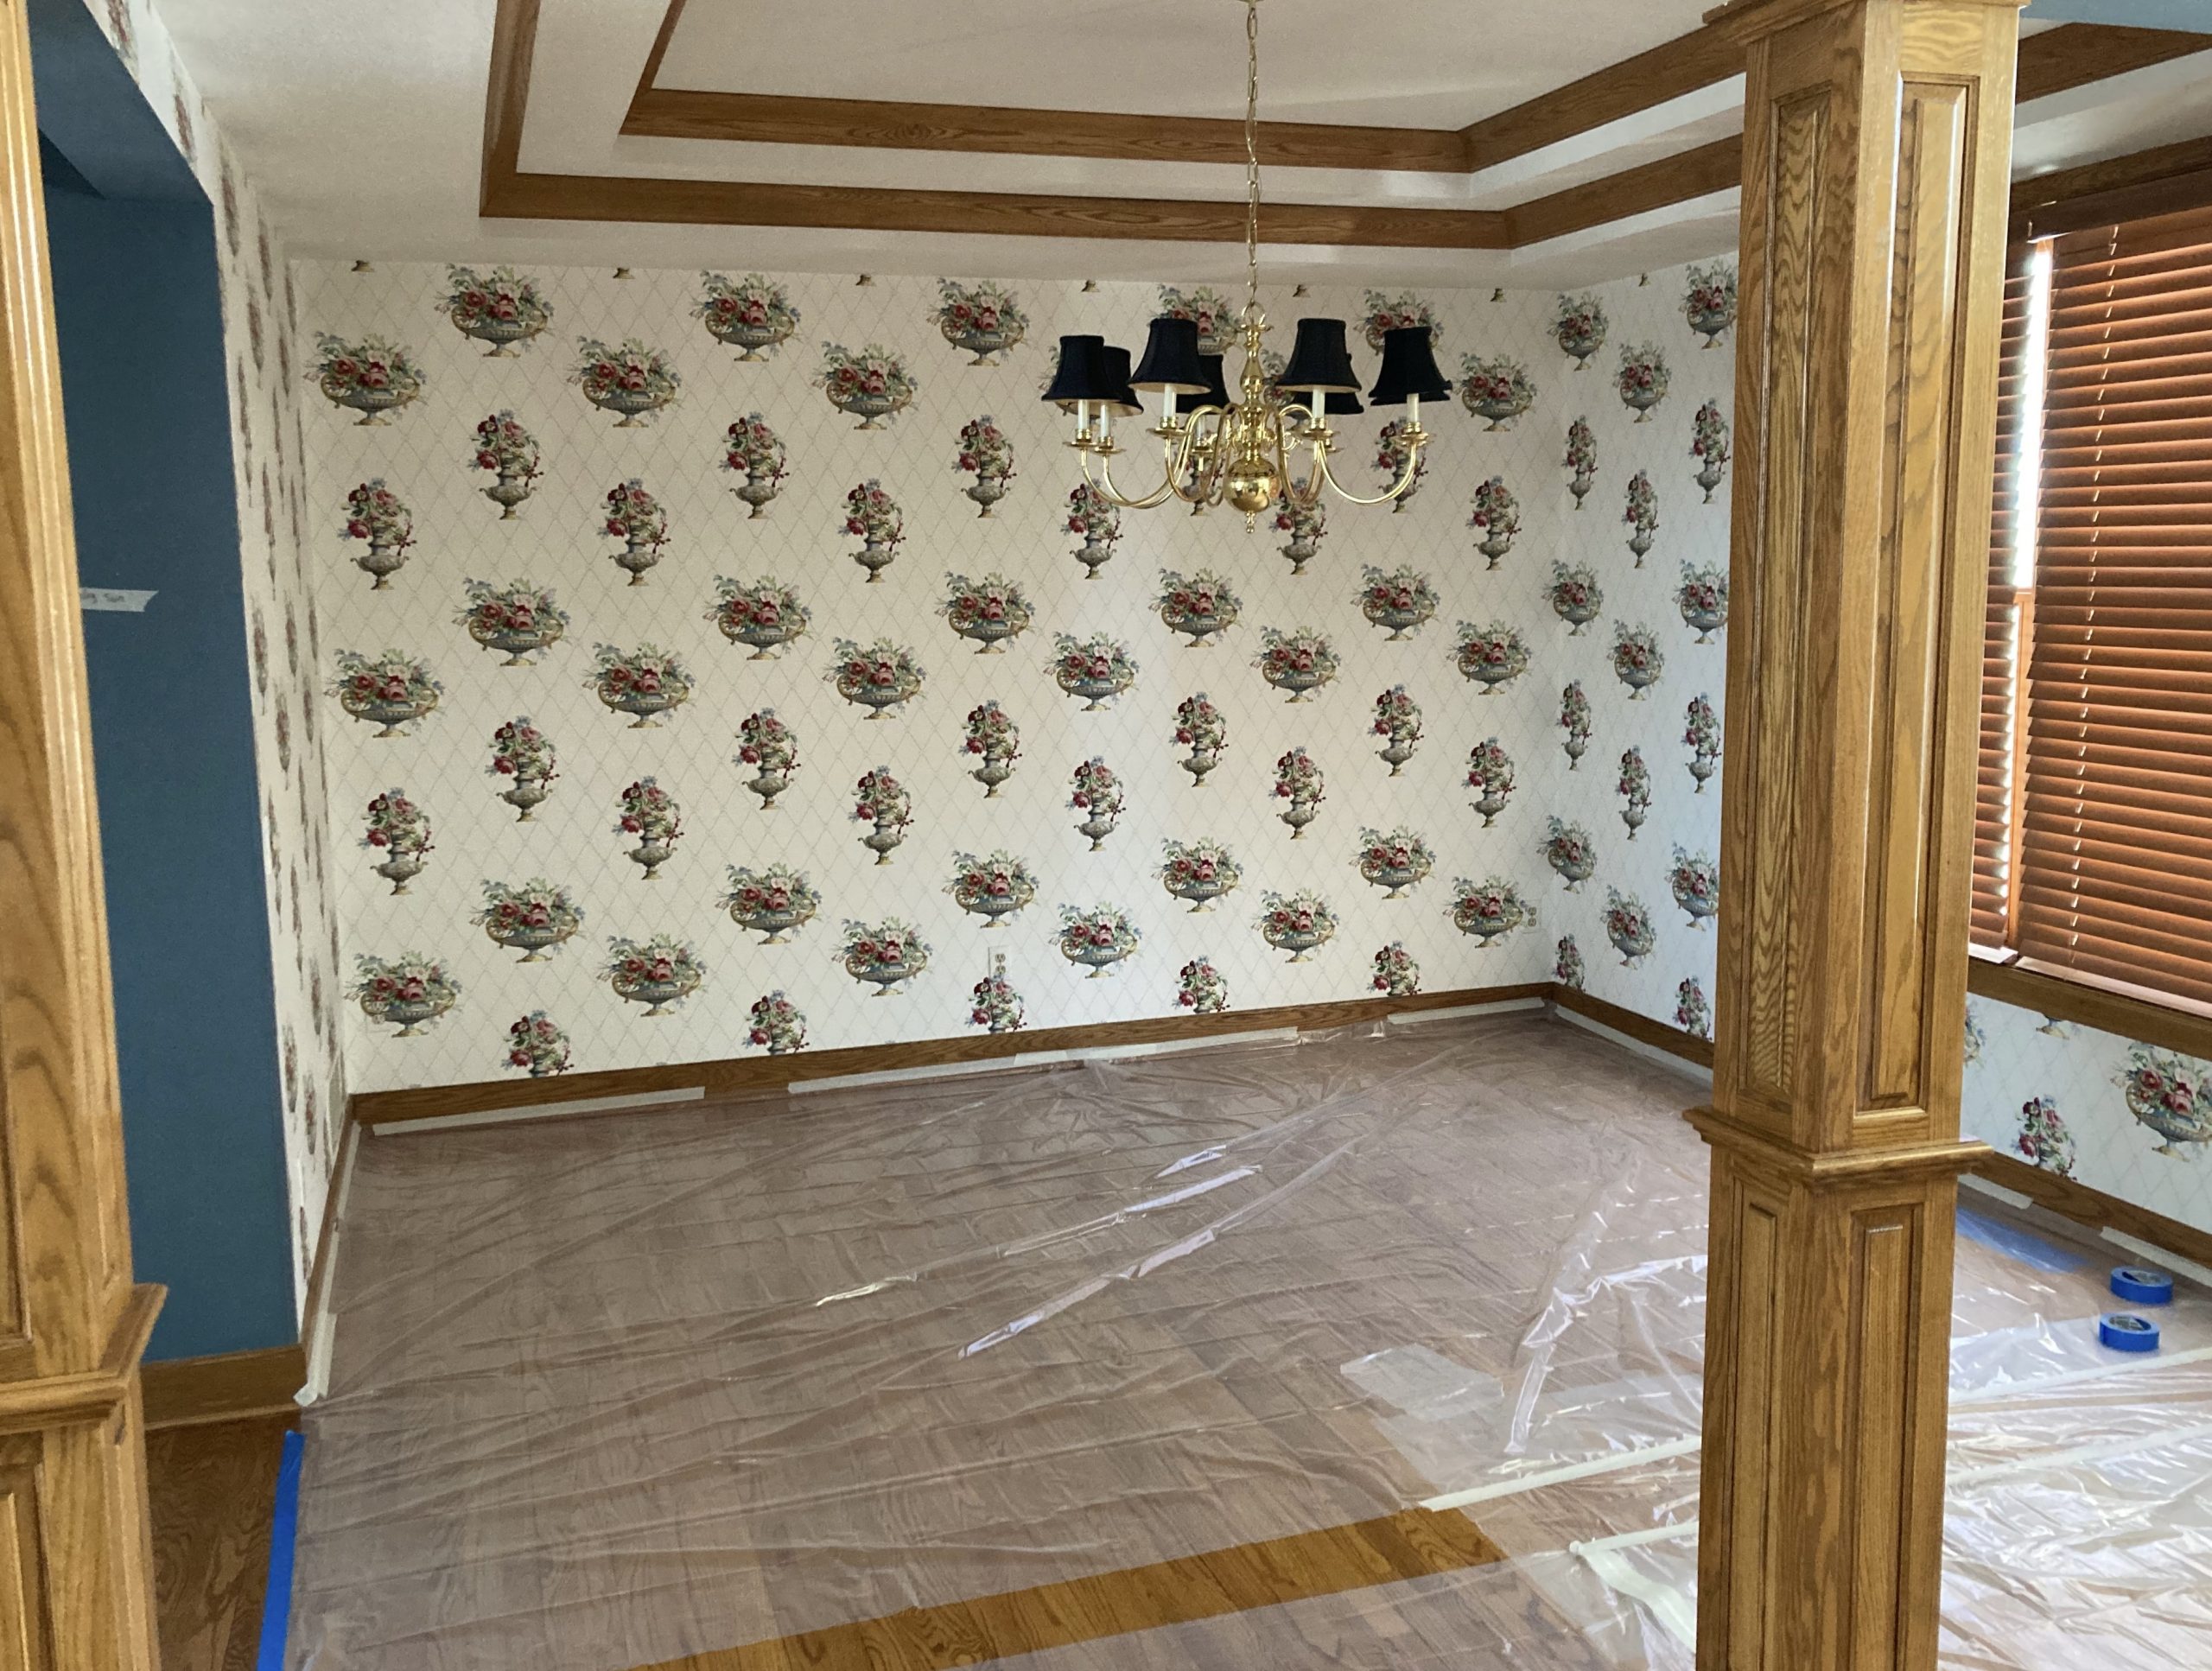 wallpaper removal before